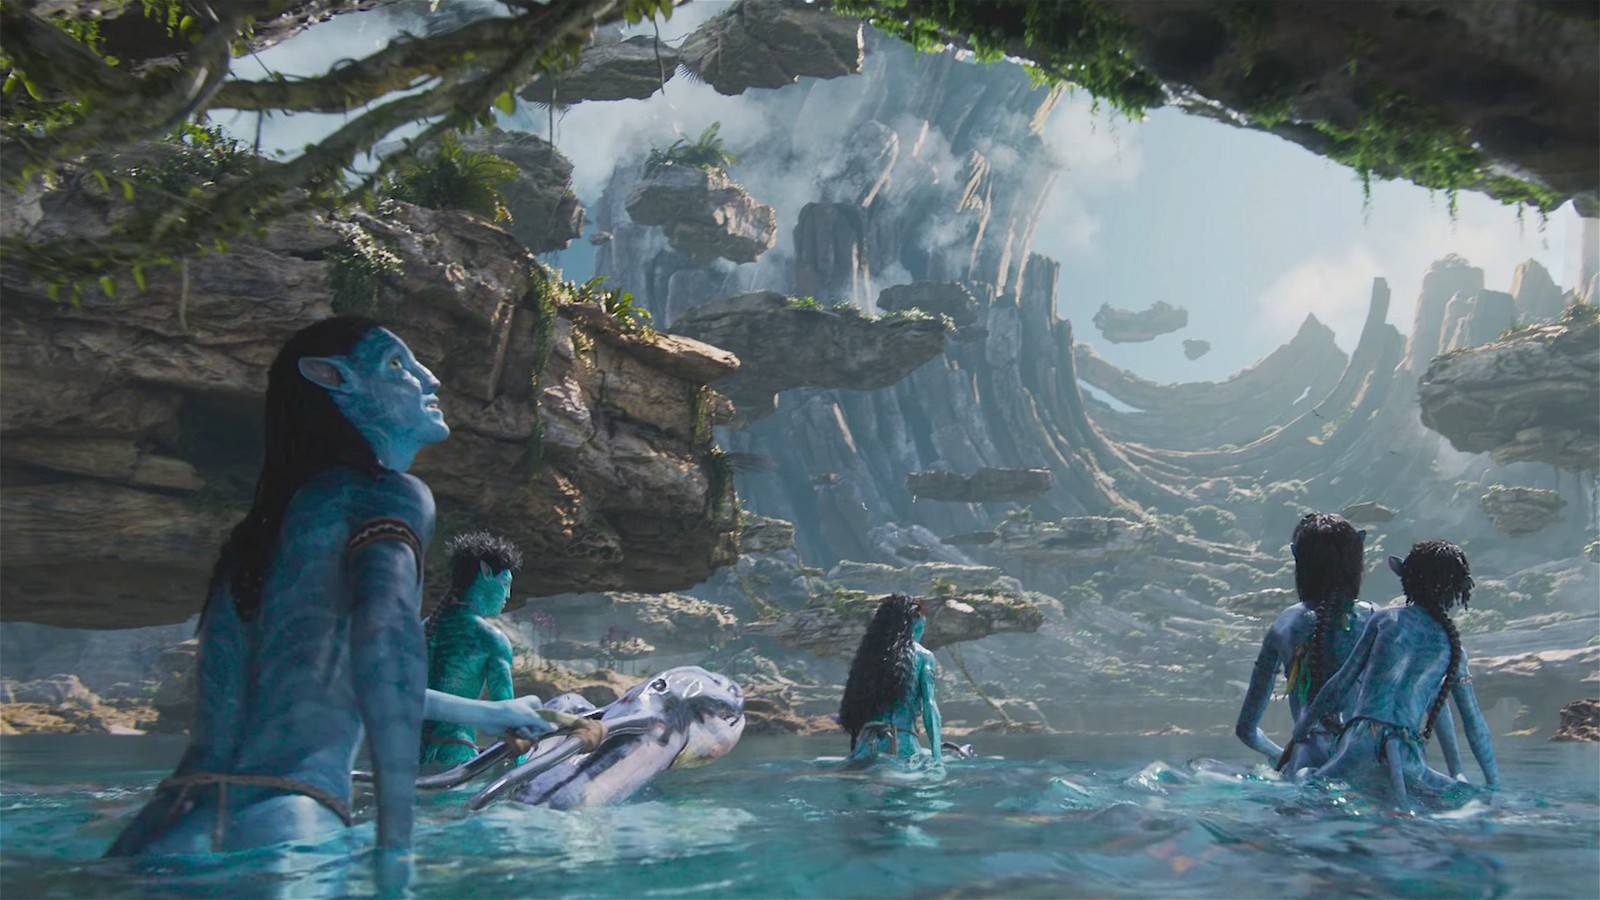 James Cameron's Avatar: The Way of Water.